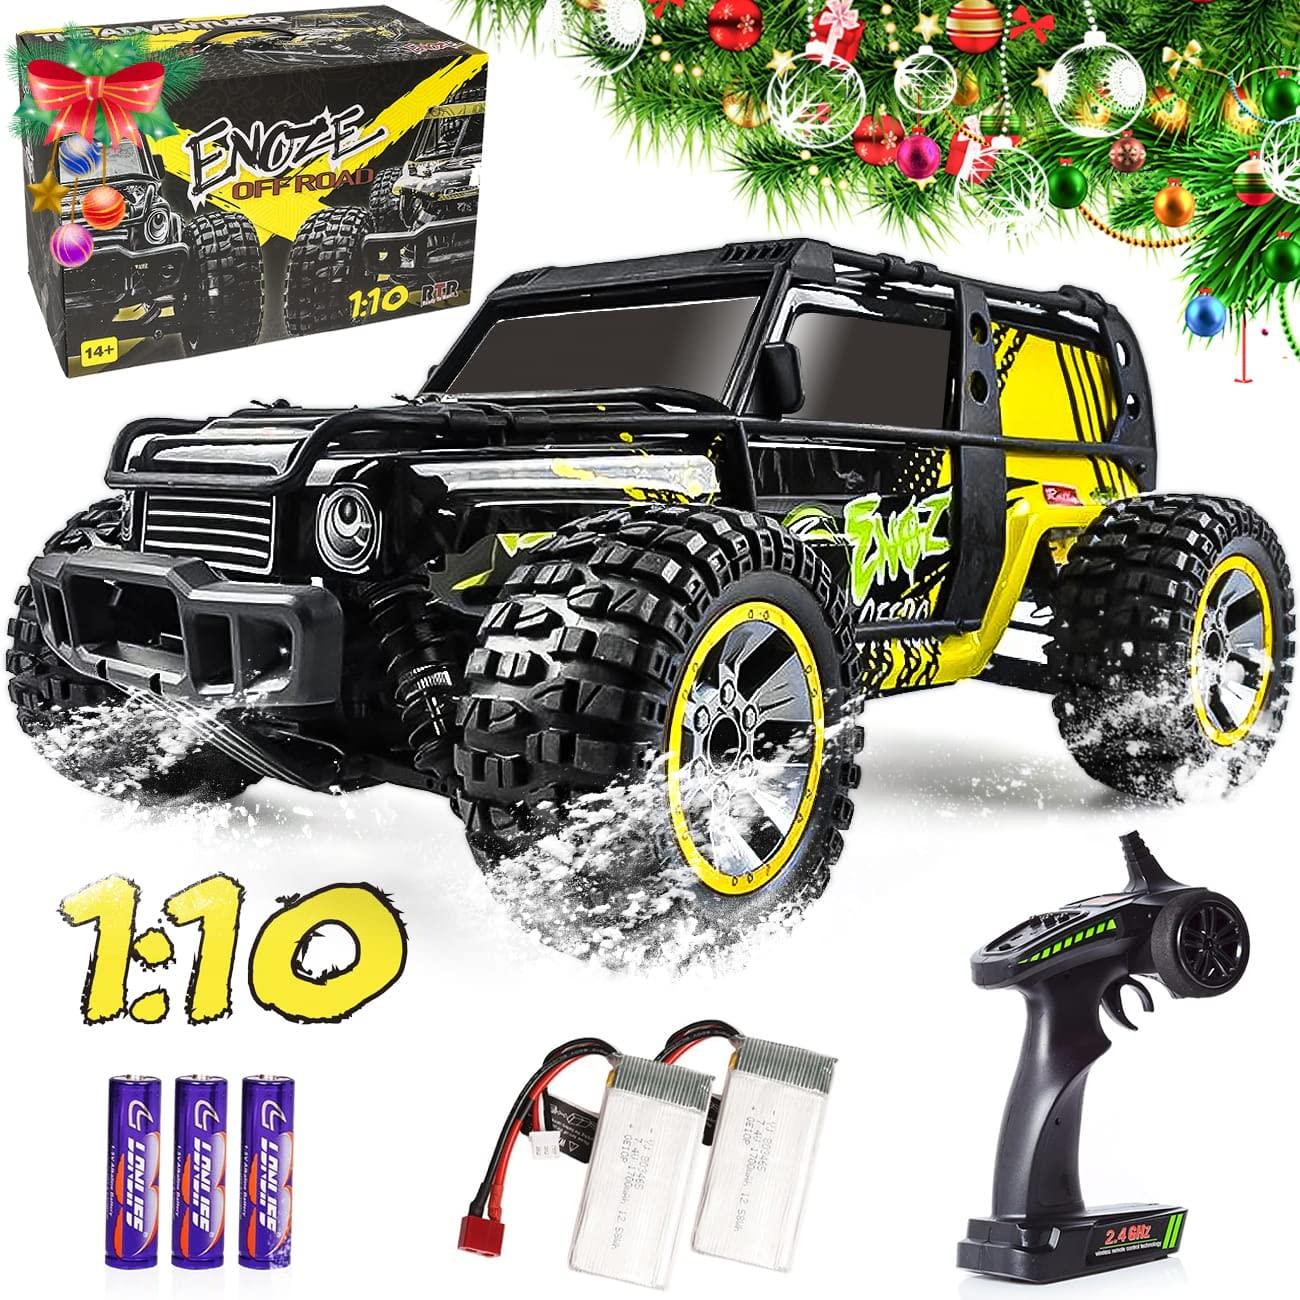 Best 1/10 Scale Rc: Top 1/10 Scale RC Trucks for Off-Road Enthusiasts